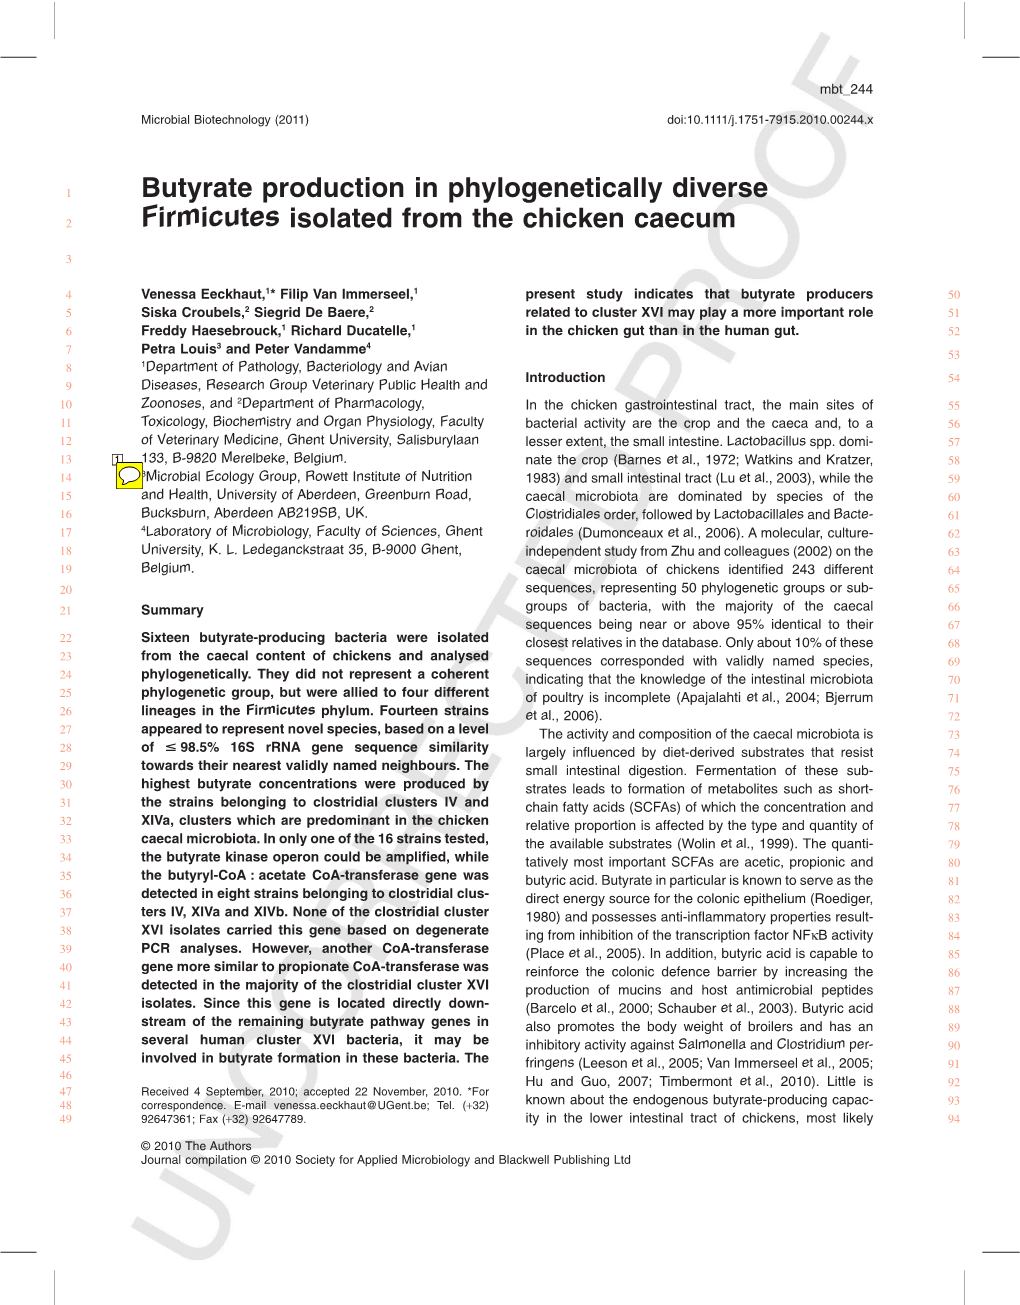 Butyrate Production in Phylogenetically Diverse Firmicutes